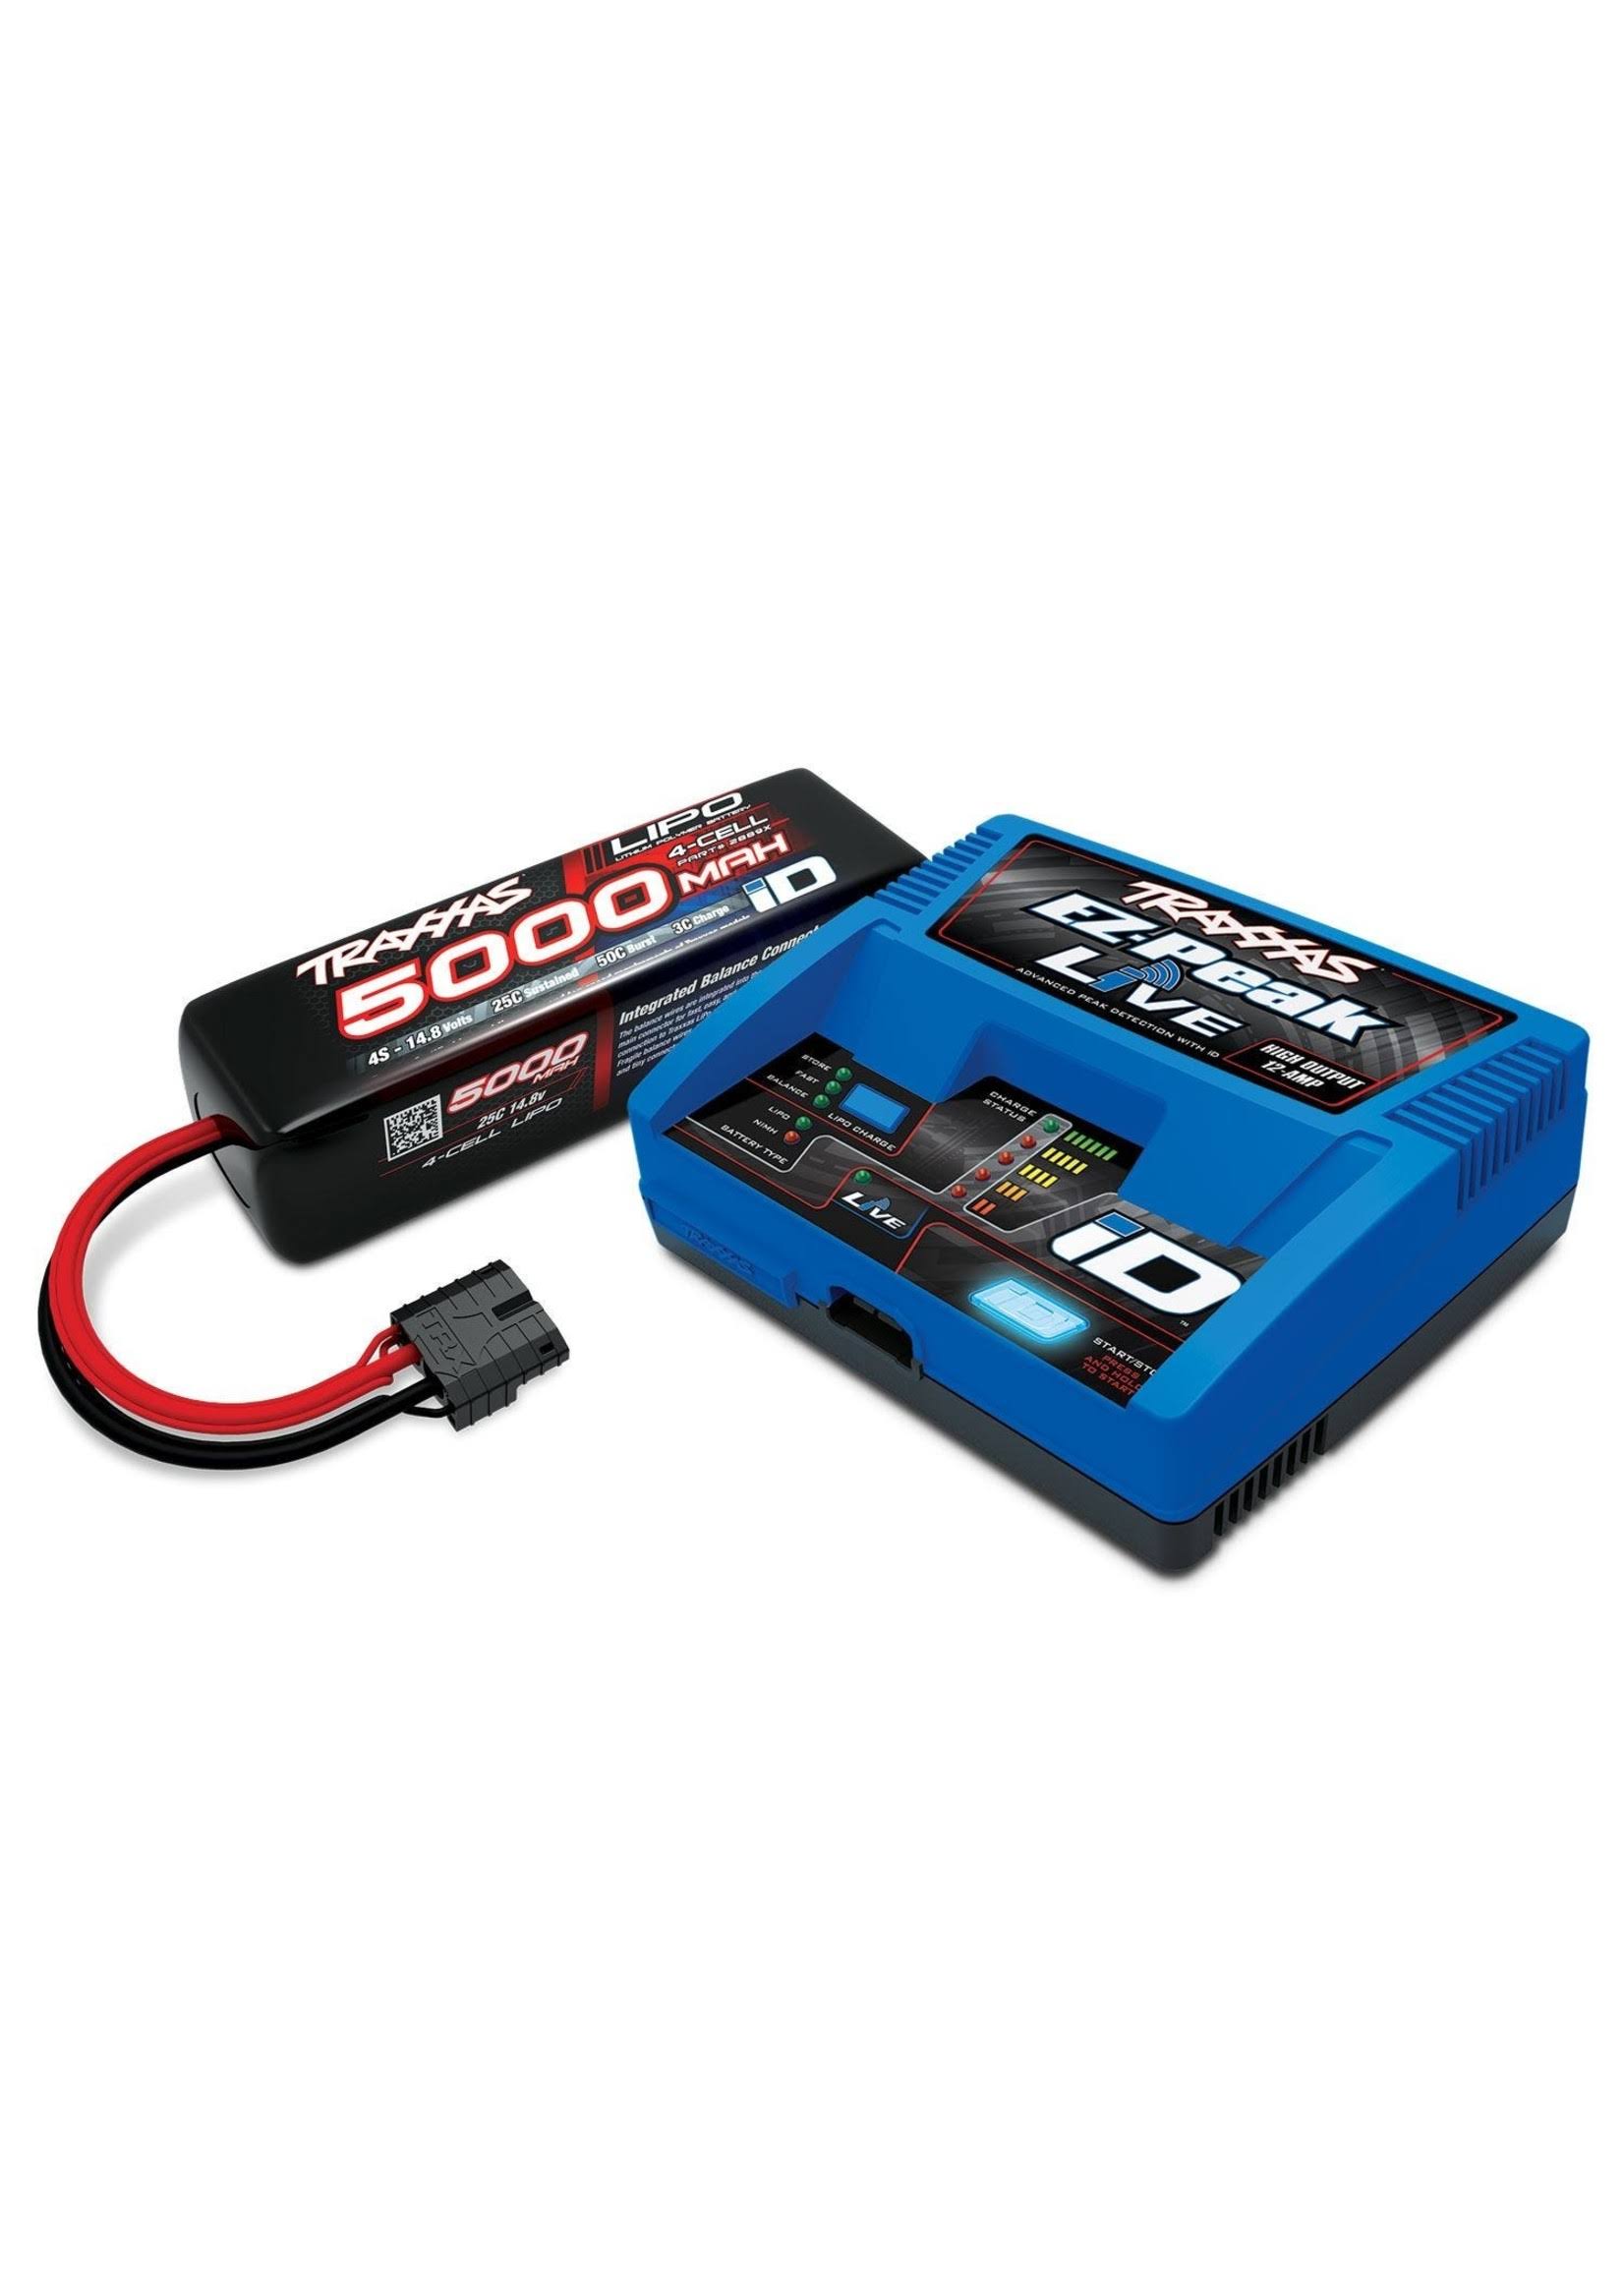 Traxxas EZ-Peak 4S Completer Pack with a 5000mAh LiPo